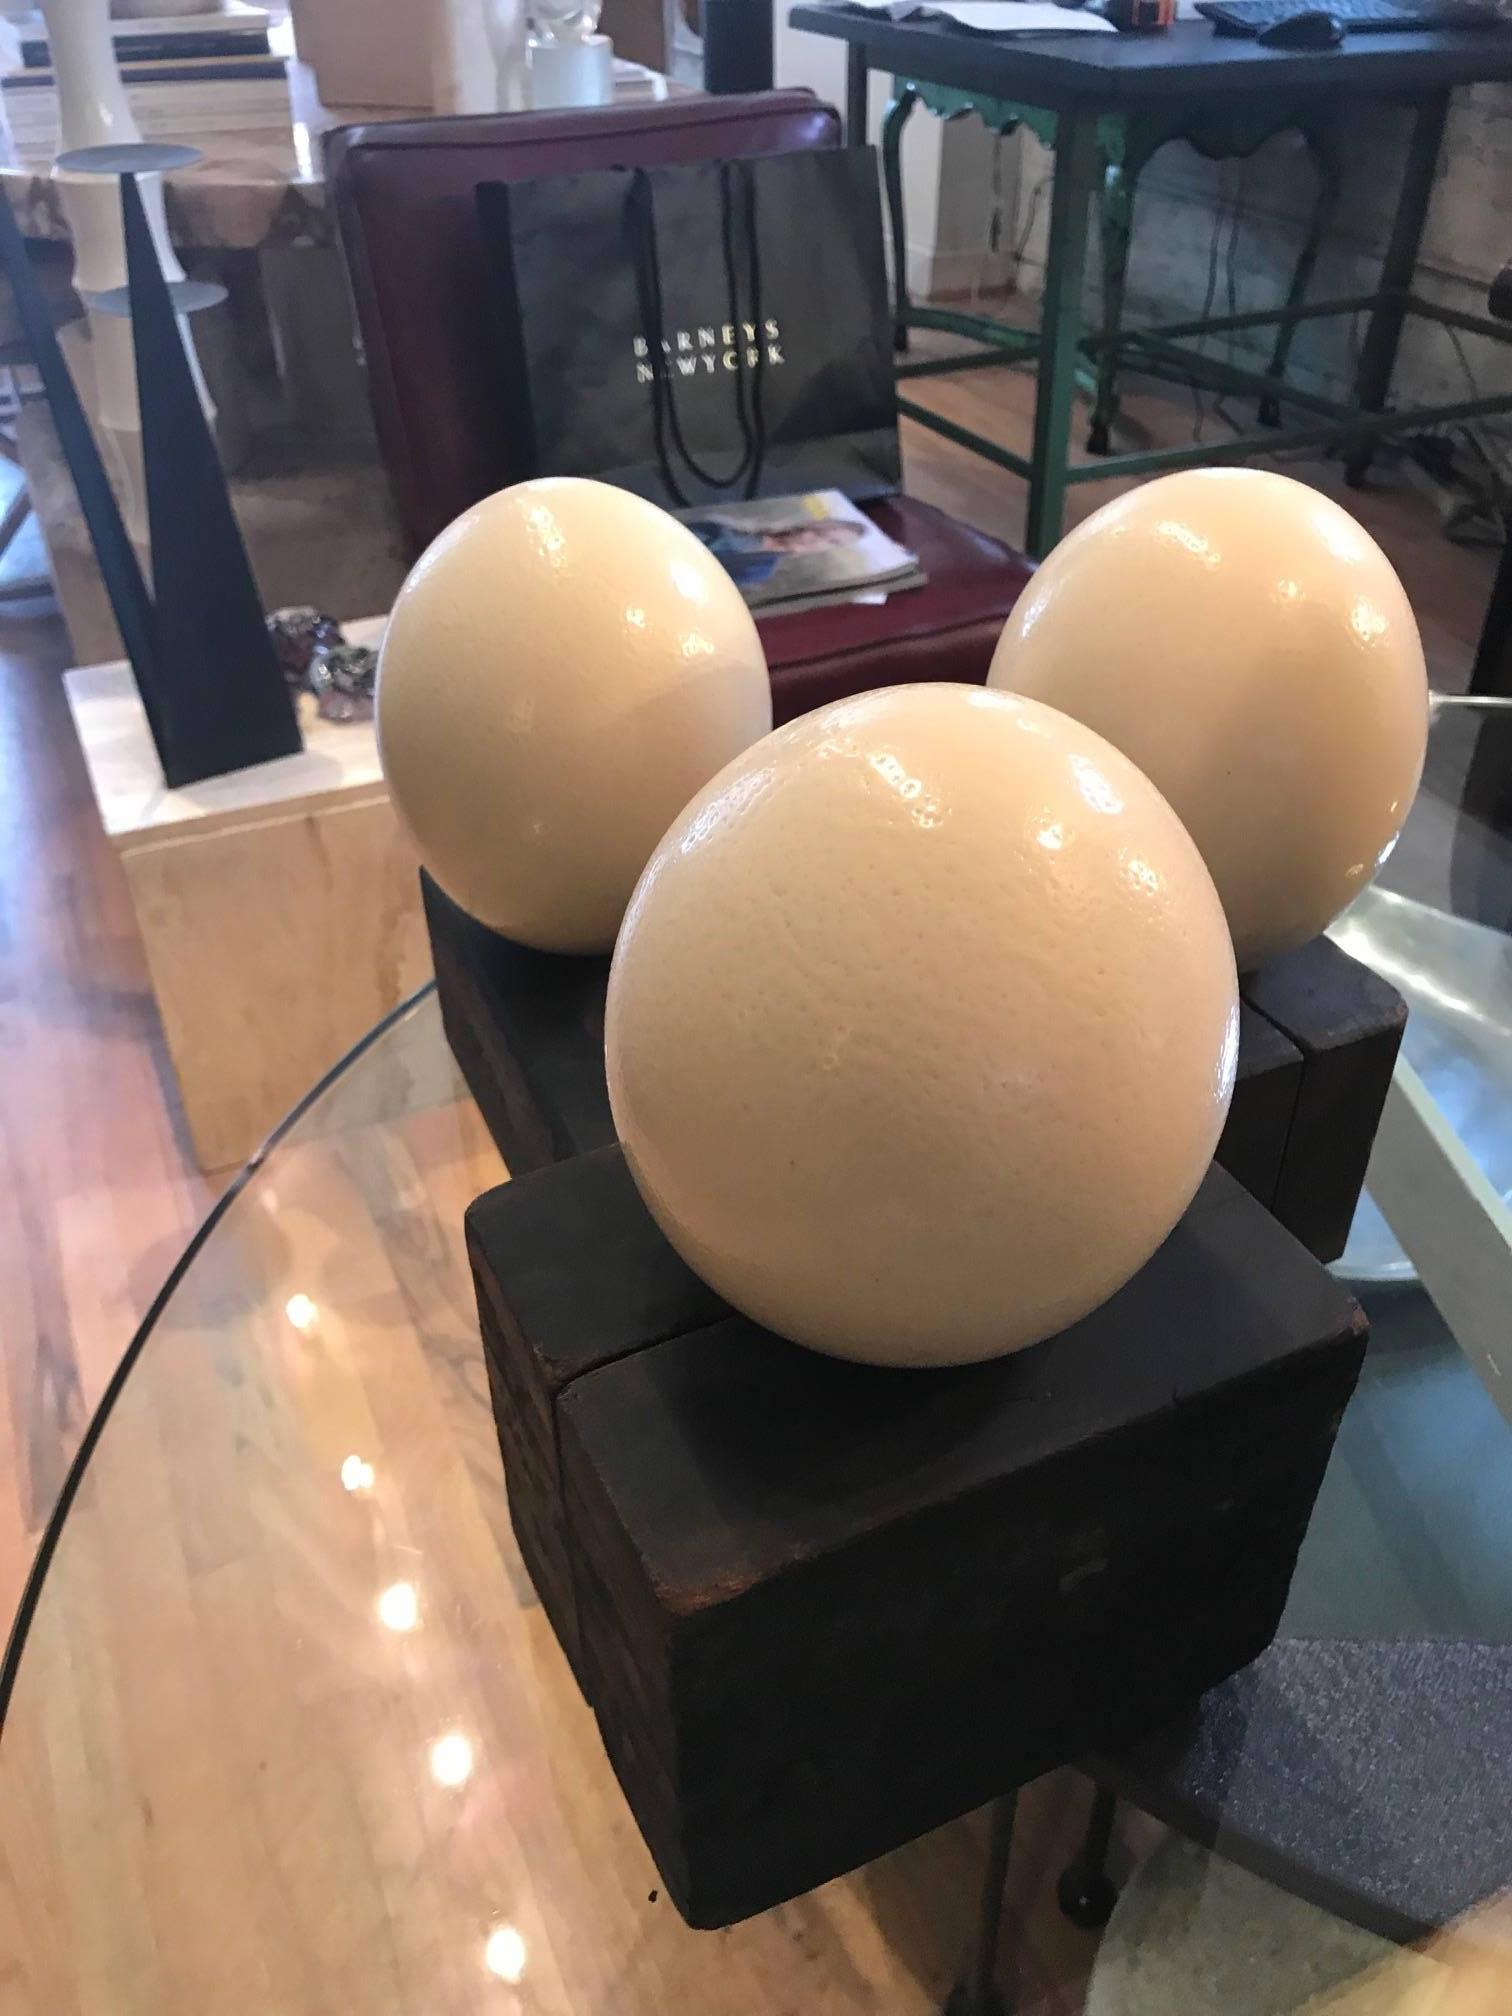  Three ostrich eggs on industrial wood bases. Unique decorative natural specimen tabletop objects.
The measurement is for the egg itself.